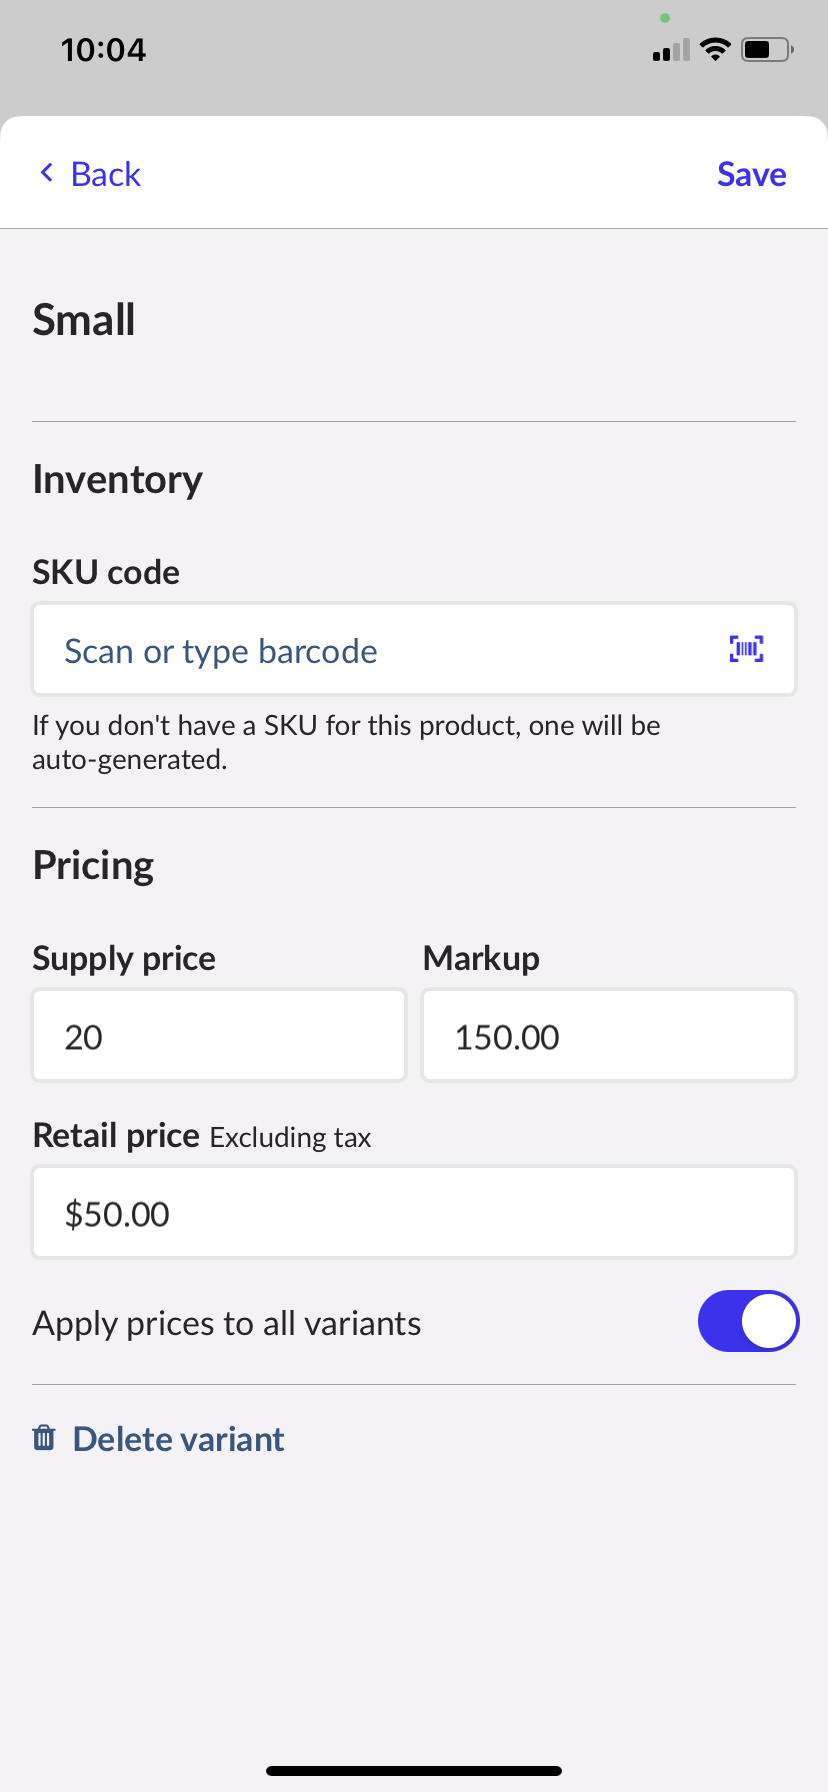 Variant details page with fields for inventory and pricing information